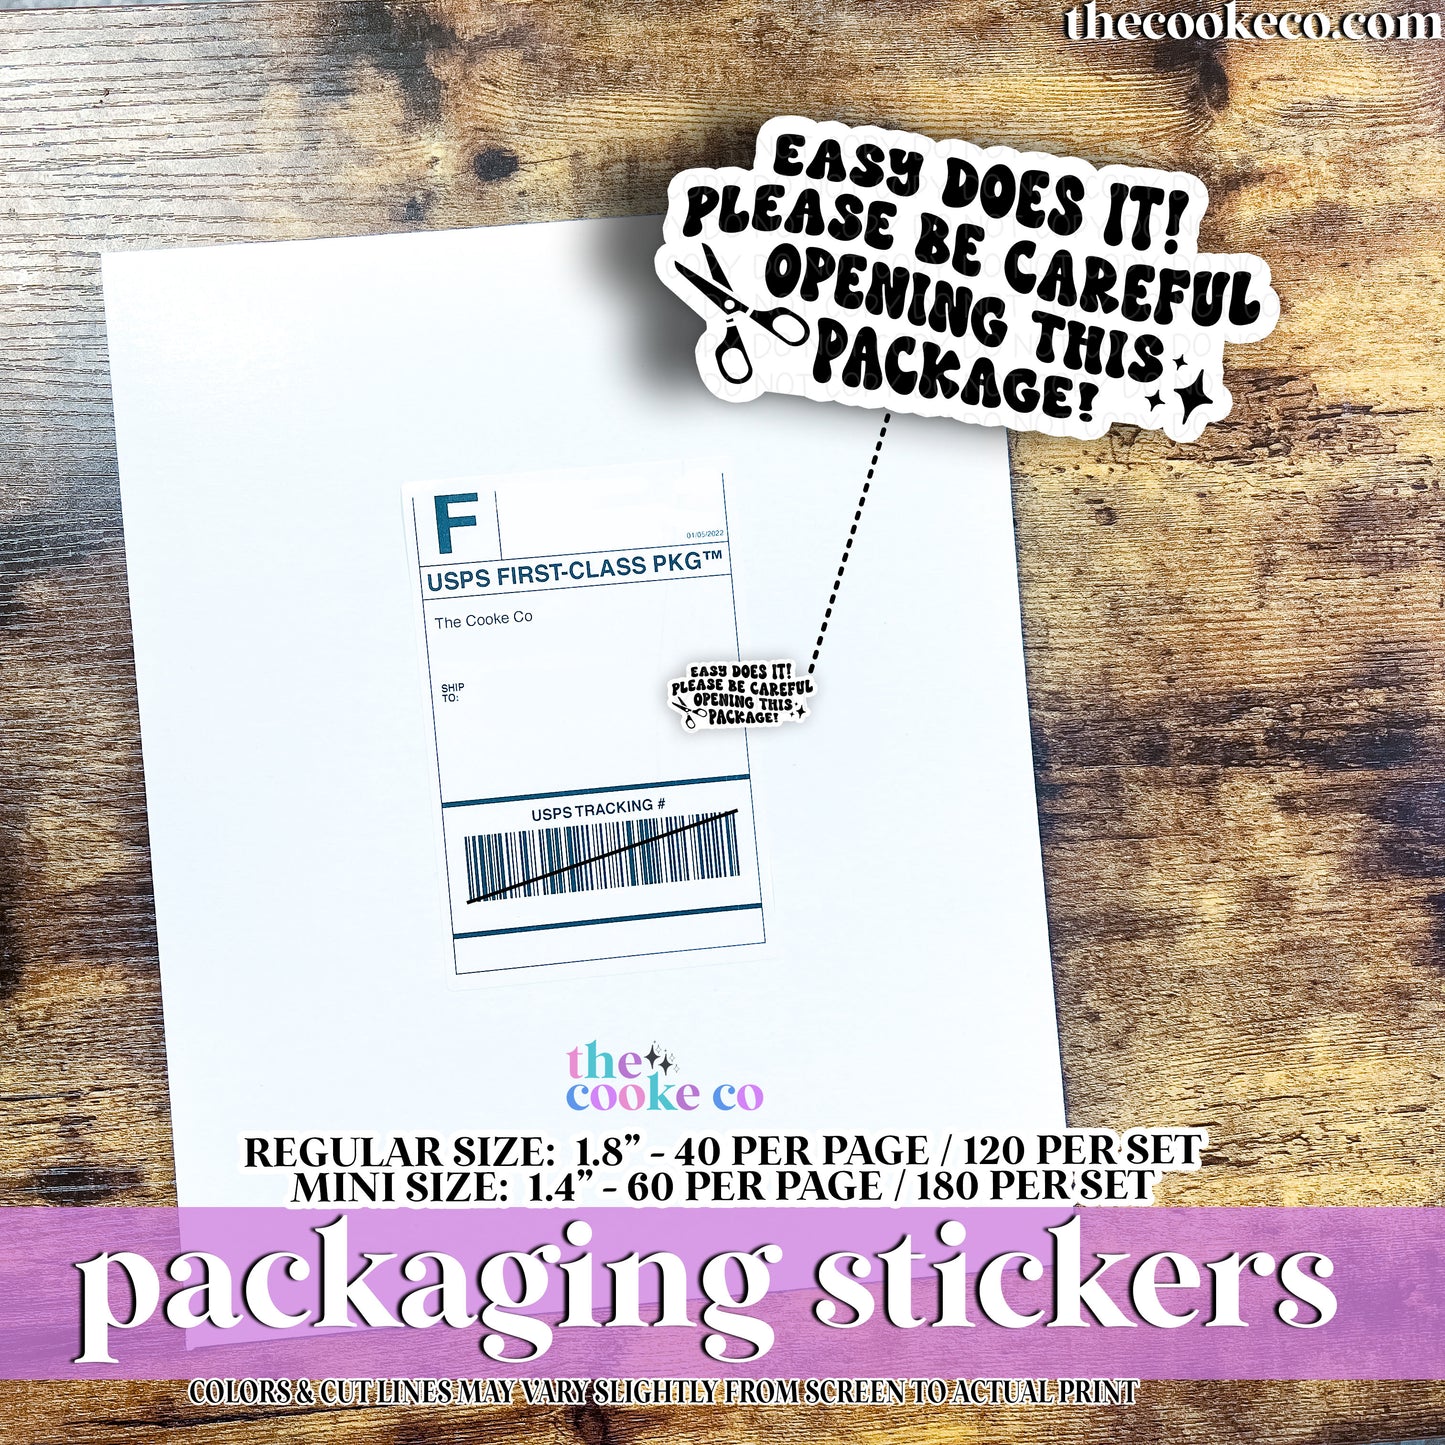 Packaging Stickers | #BW0239 - EASY DOES IT